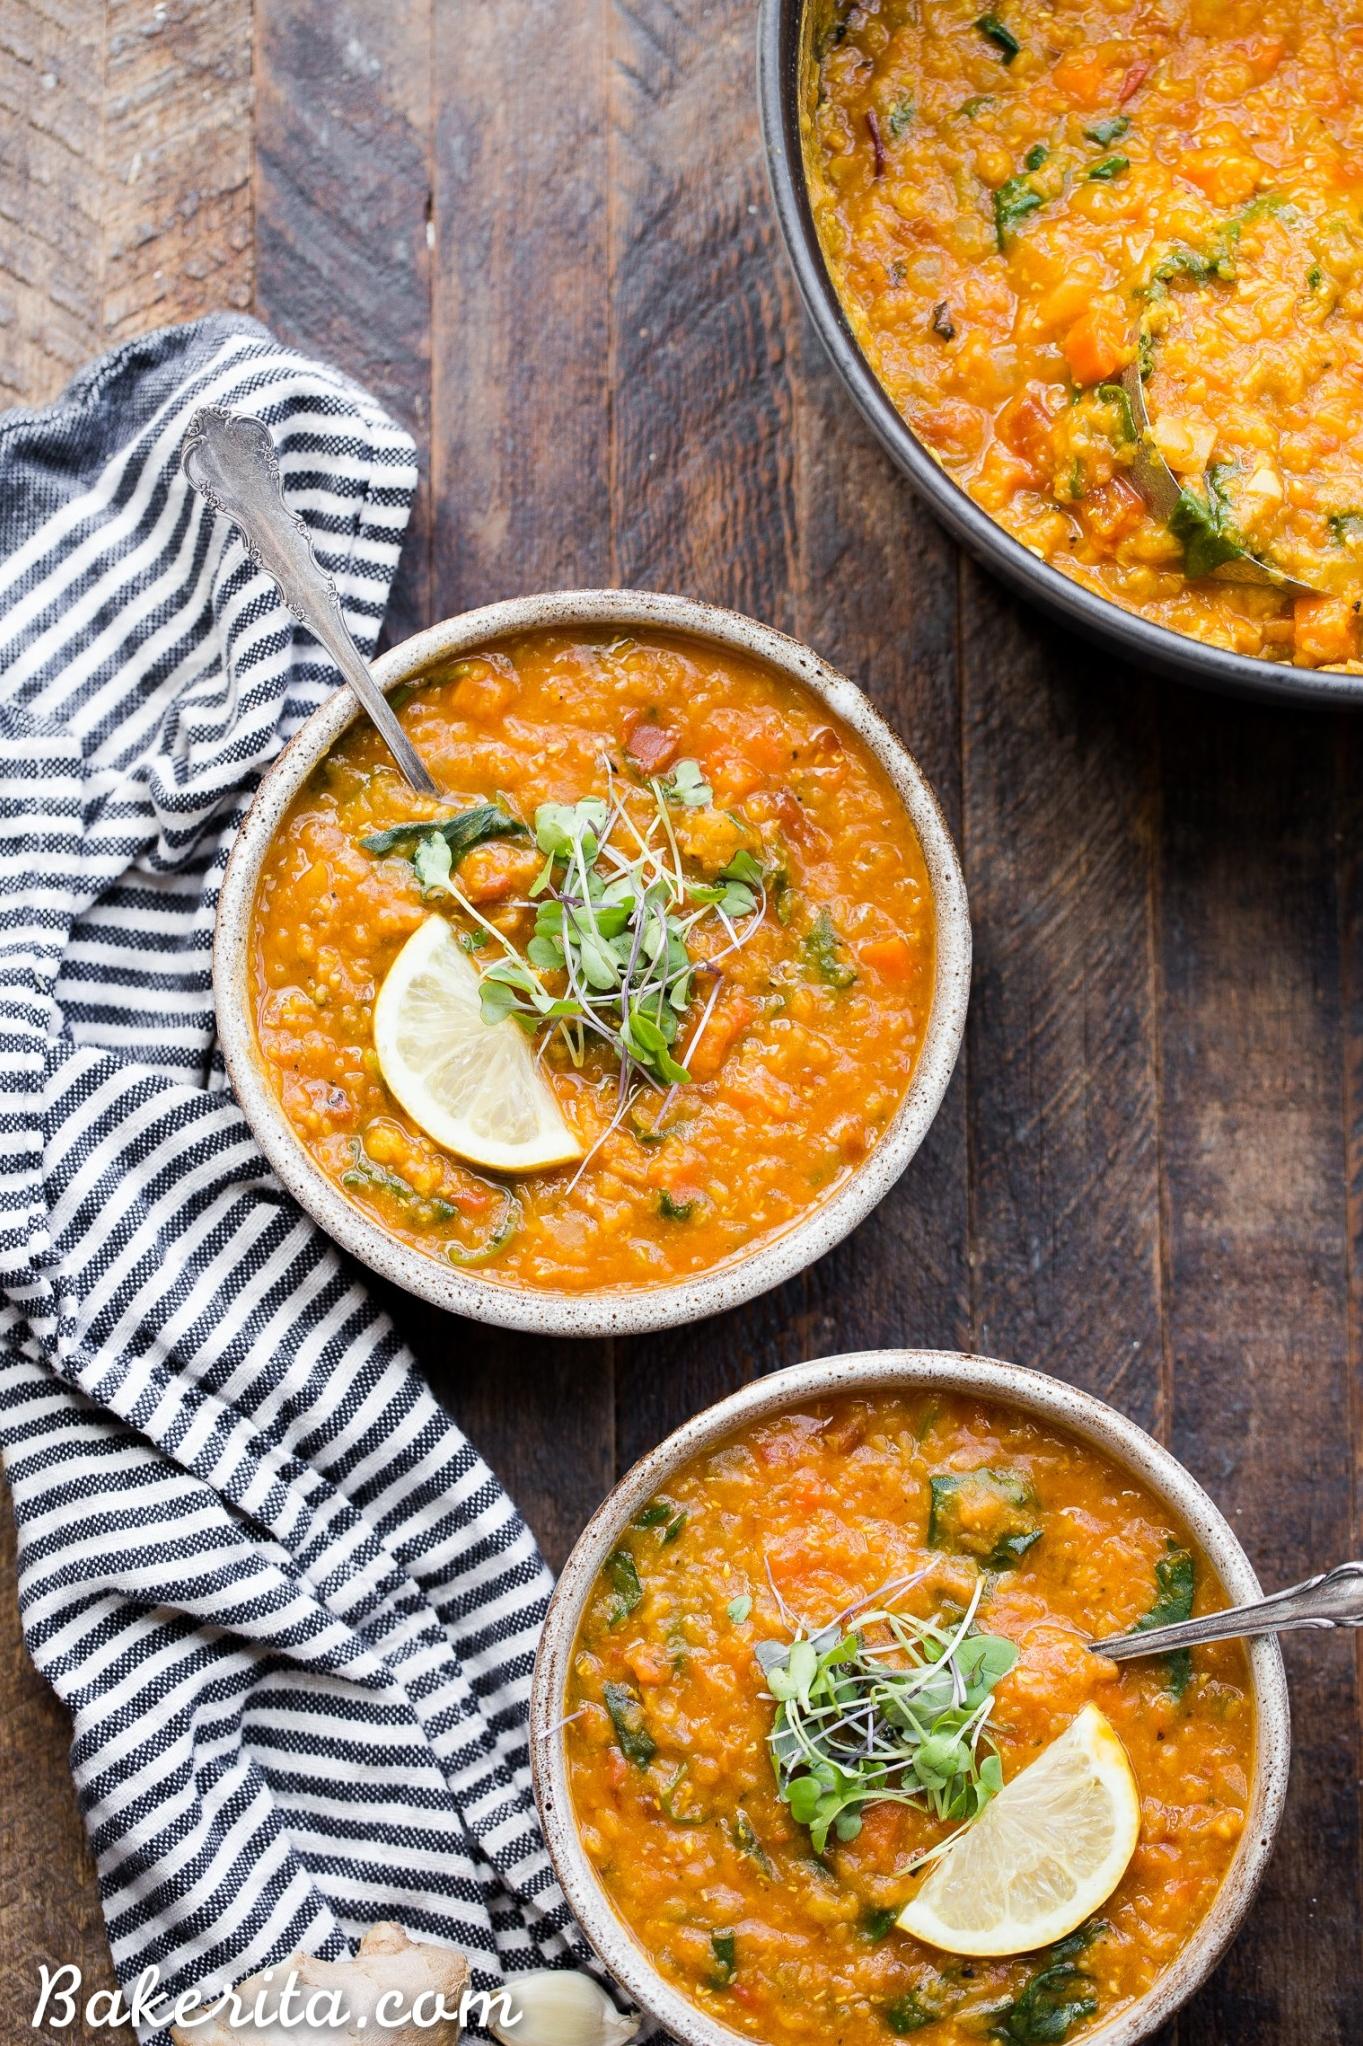 Hearty Red Lentil Soup Recipe for a Cozy Winter Night